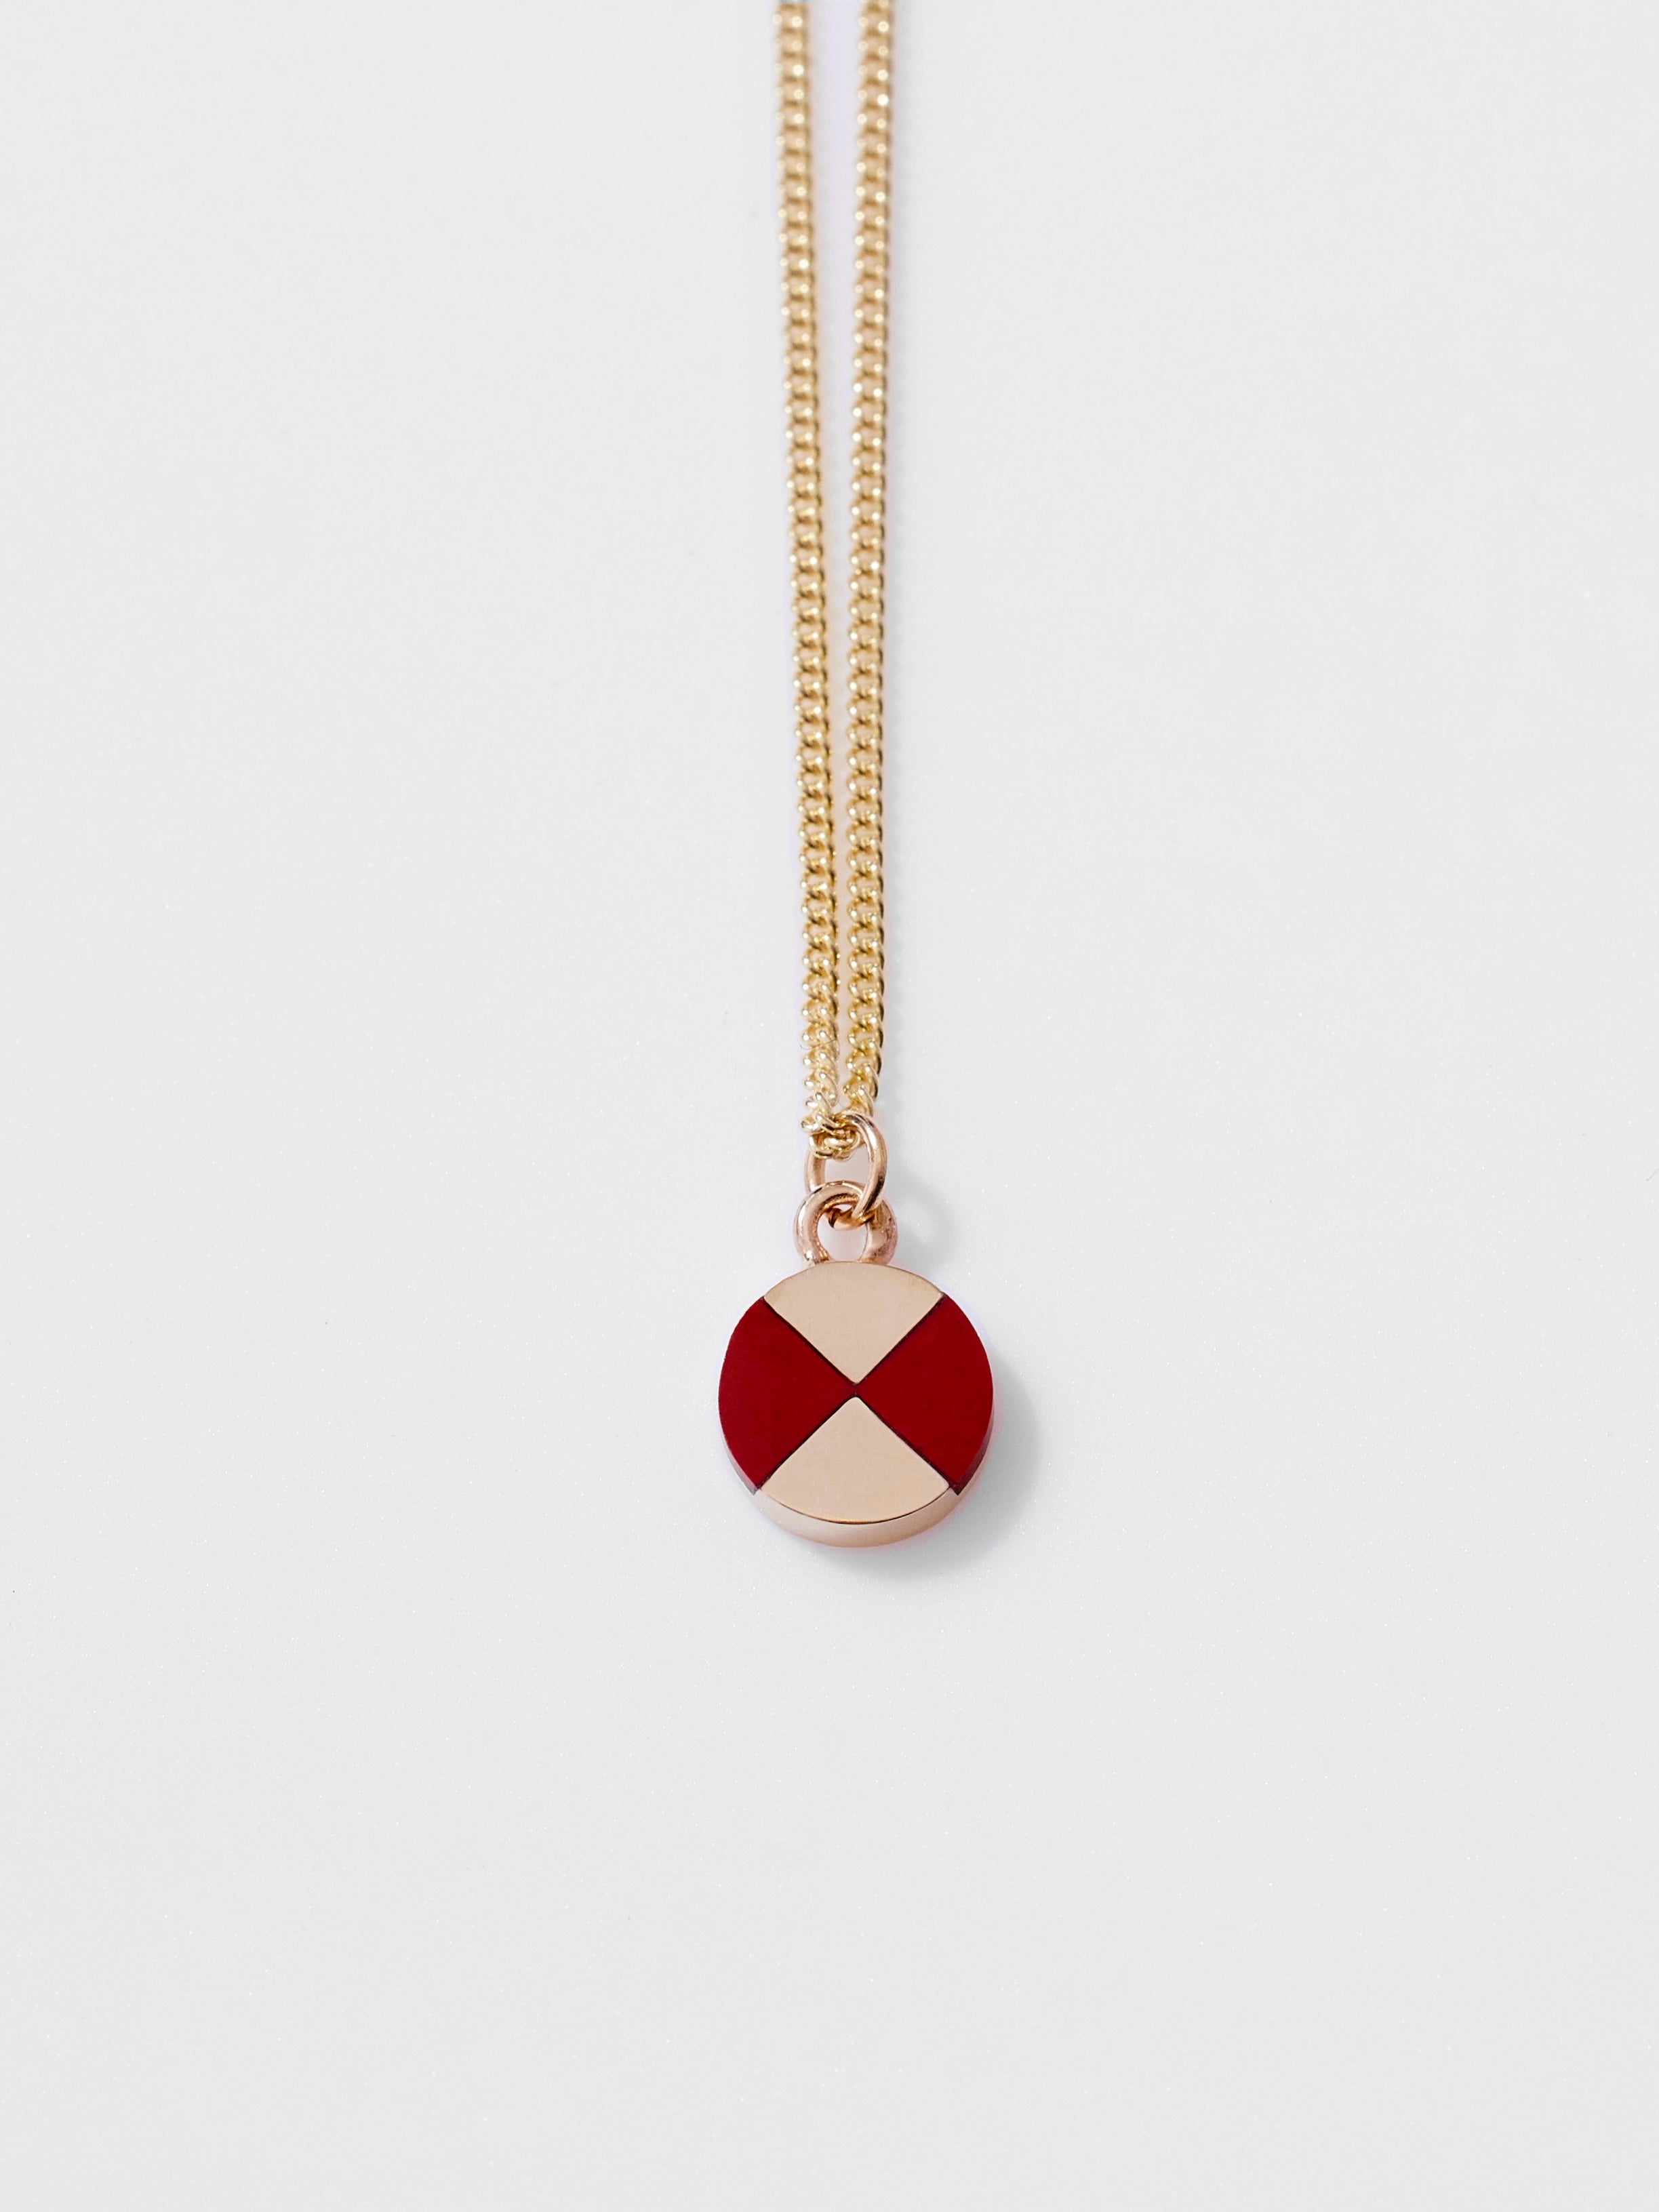 Ray Charm with Red Jasper in 10k Yellow Gold, 18"